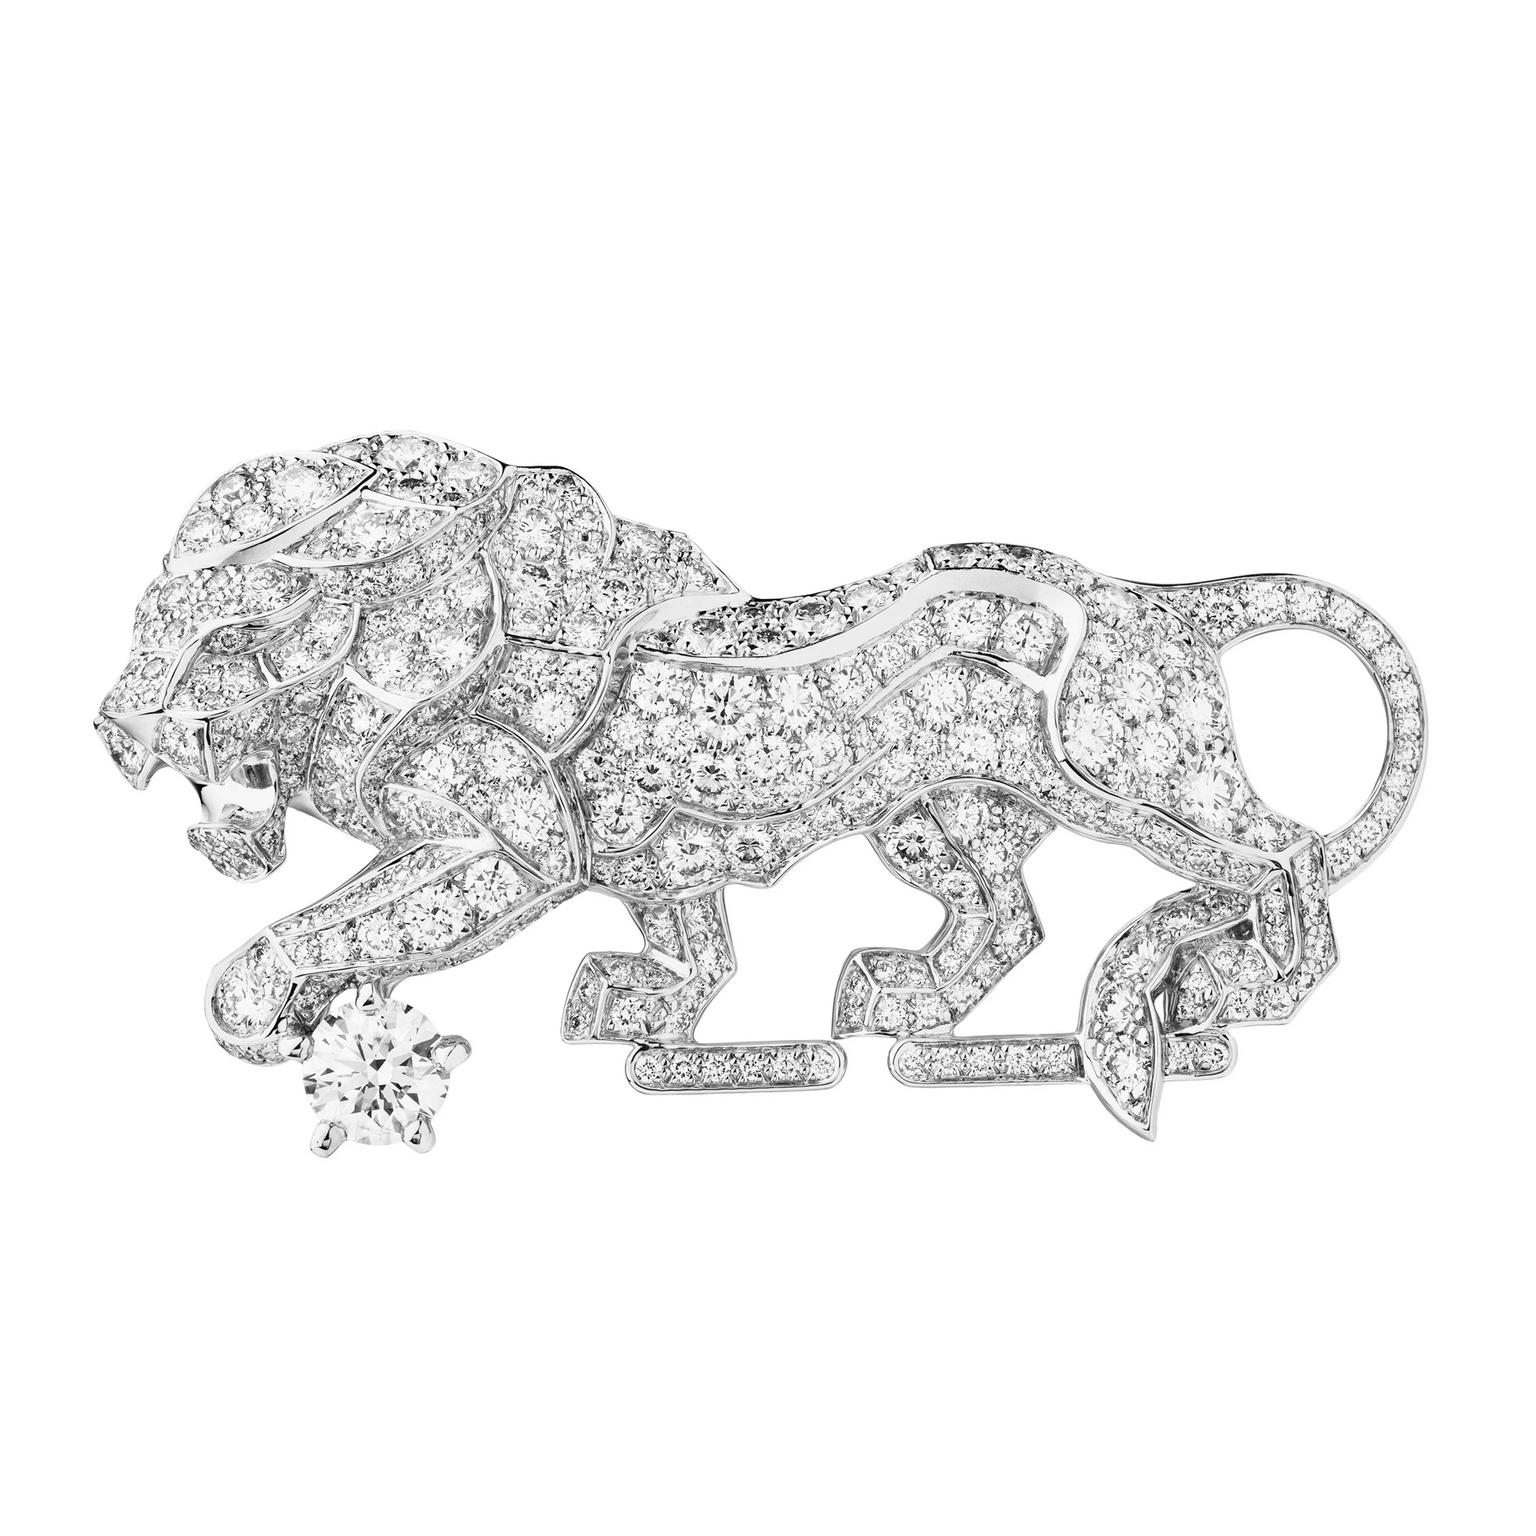 Chanel’s new L’Esprit du Lion high jewellery collection features four brooches including the ‘Timeless’ pin set with a dazzling 314 brilliant-cut diamonds. 